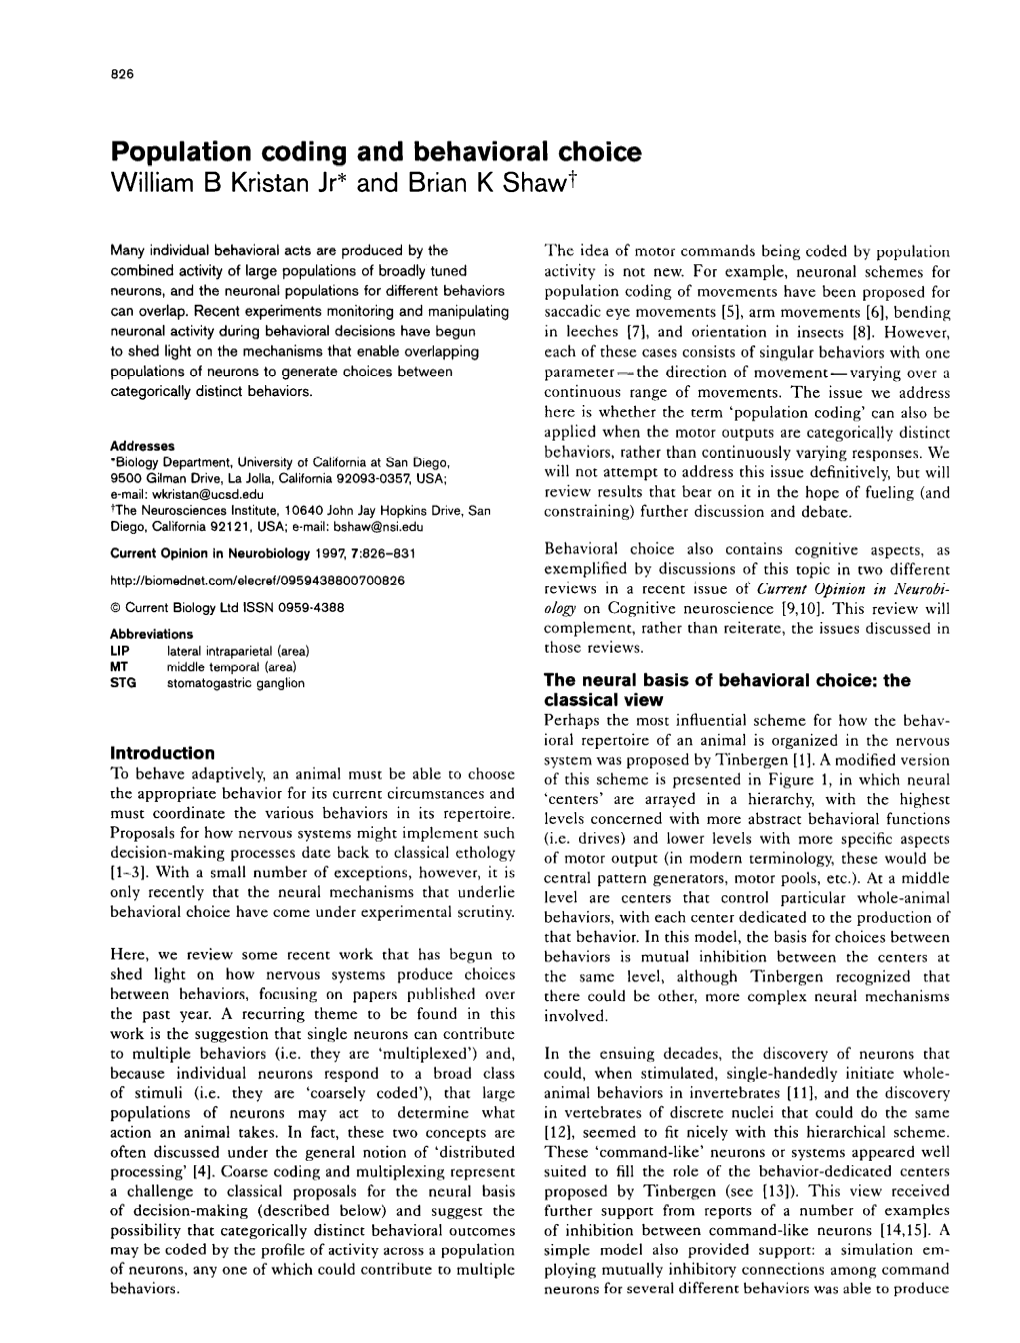 Population Coding and Behavioral Choice William B Kristan Jr* and Brian K Shawl